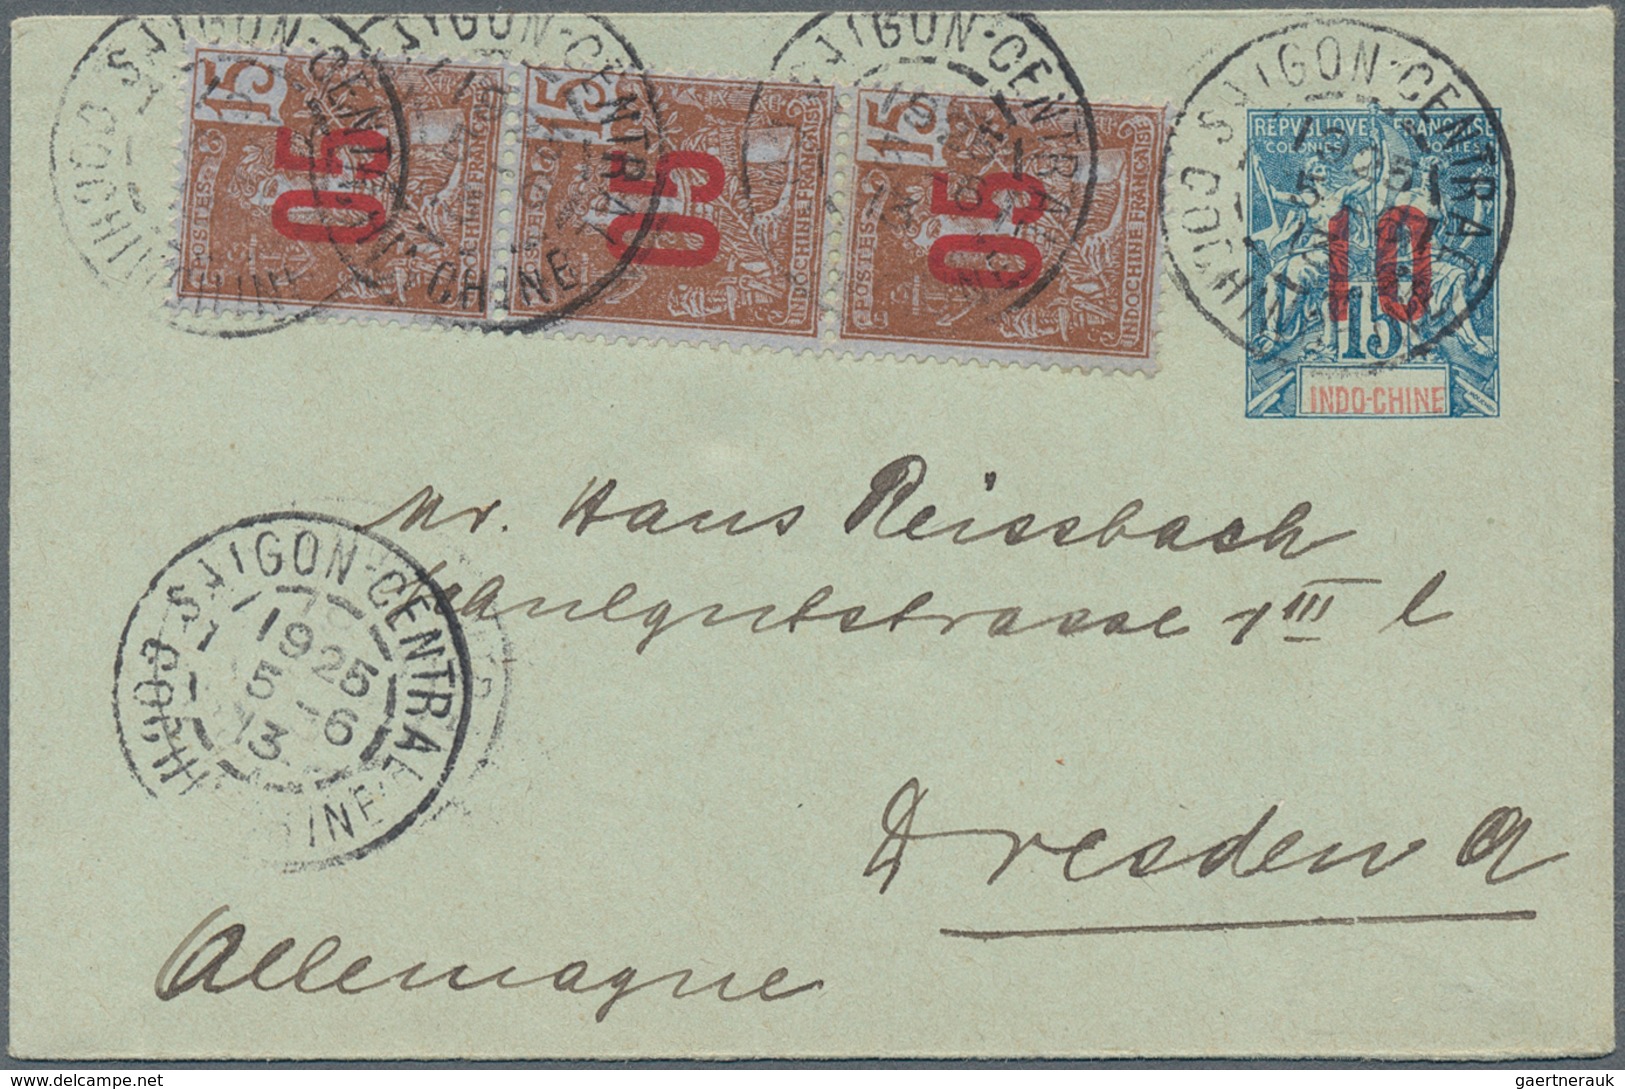 Französische Kolonien: 1850/1950 (ca.), France and mainly colonies/area, collection of apprx. 140 co